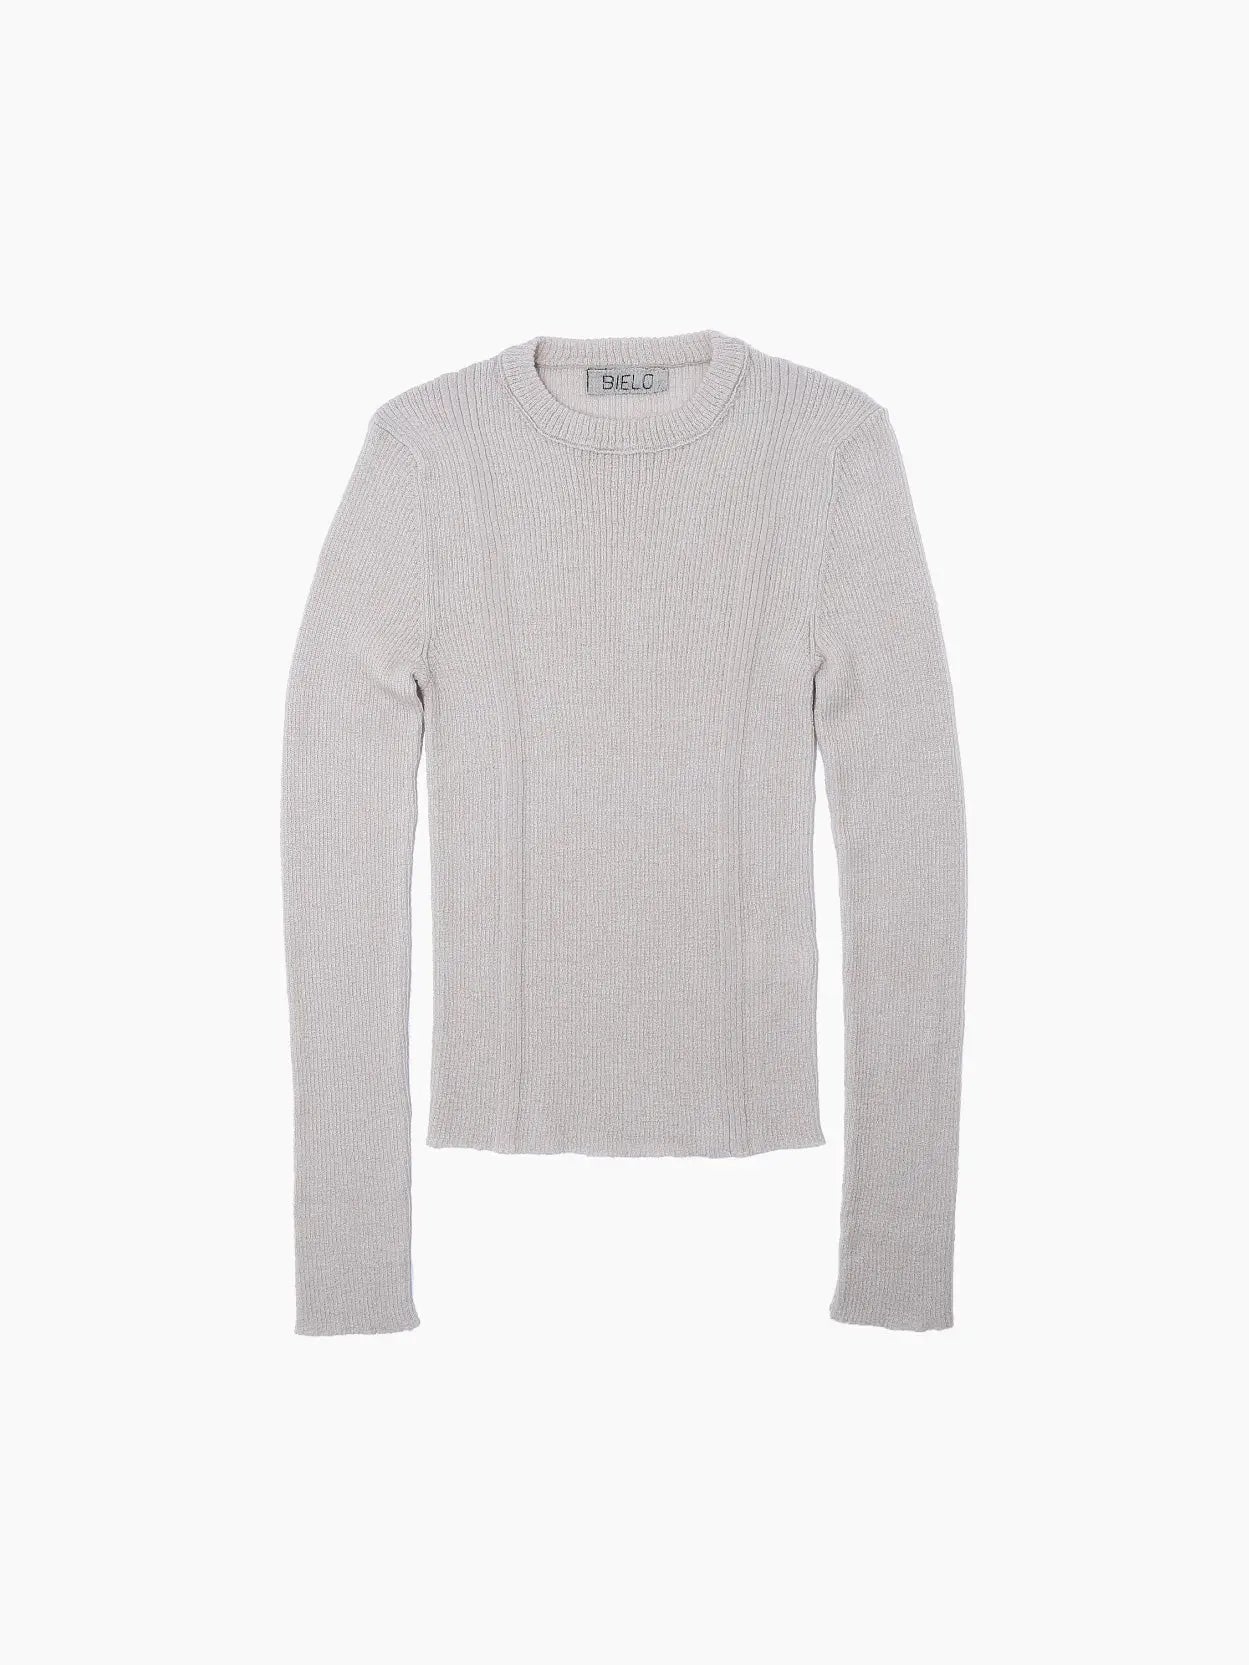 A long-sleeved, light grey ribbed sweater with a simple round neckline, laid flat against a white background. The texture appears soft, and the design is minimalist without any visible patterns or embellishments—straight from the curated collection at Bielo in Barcelona.